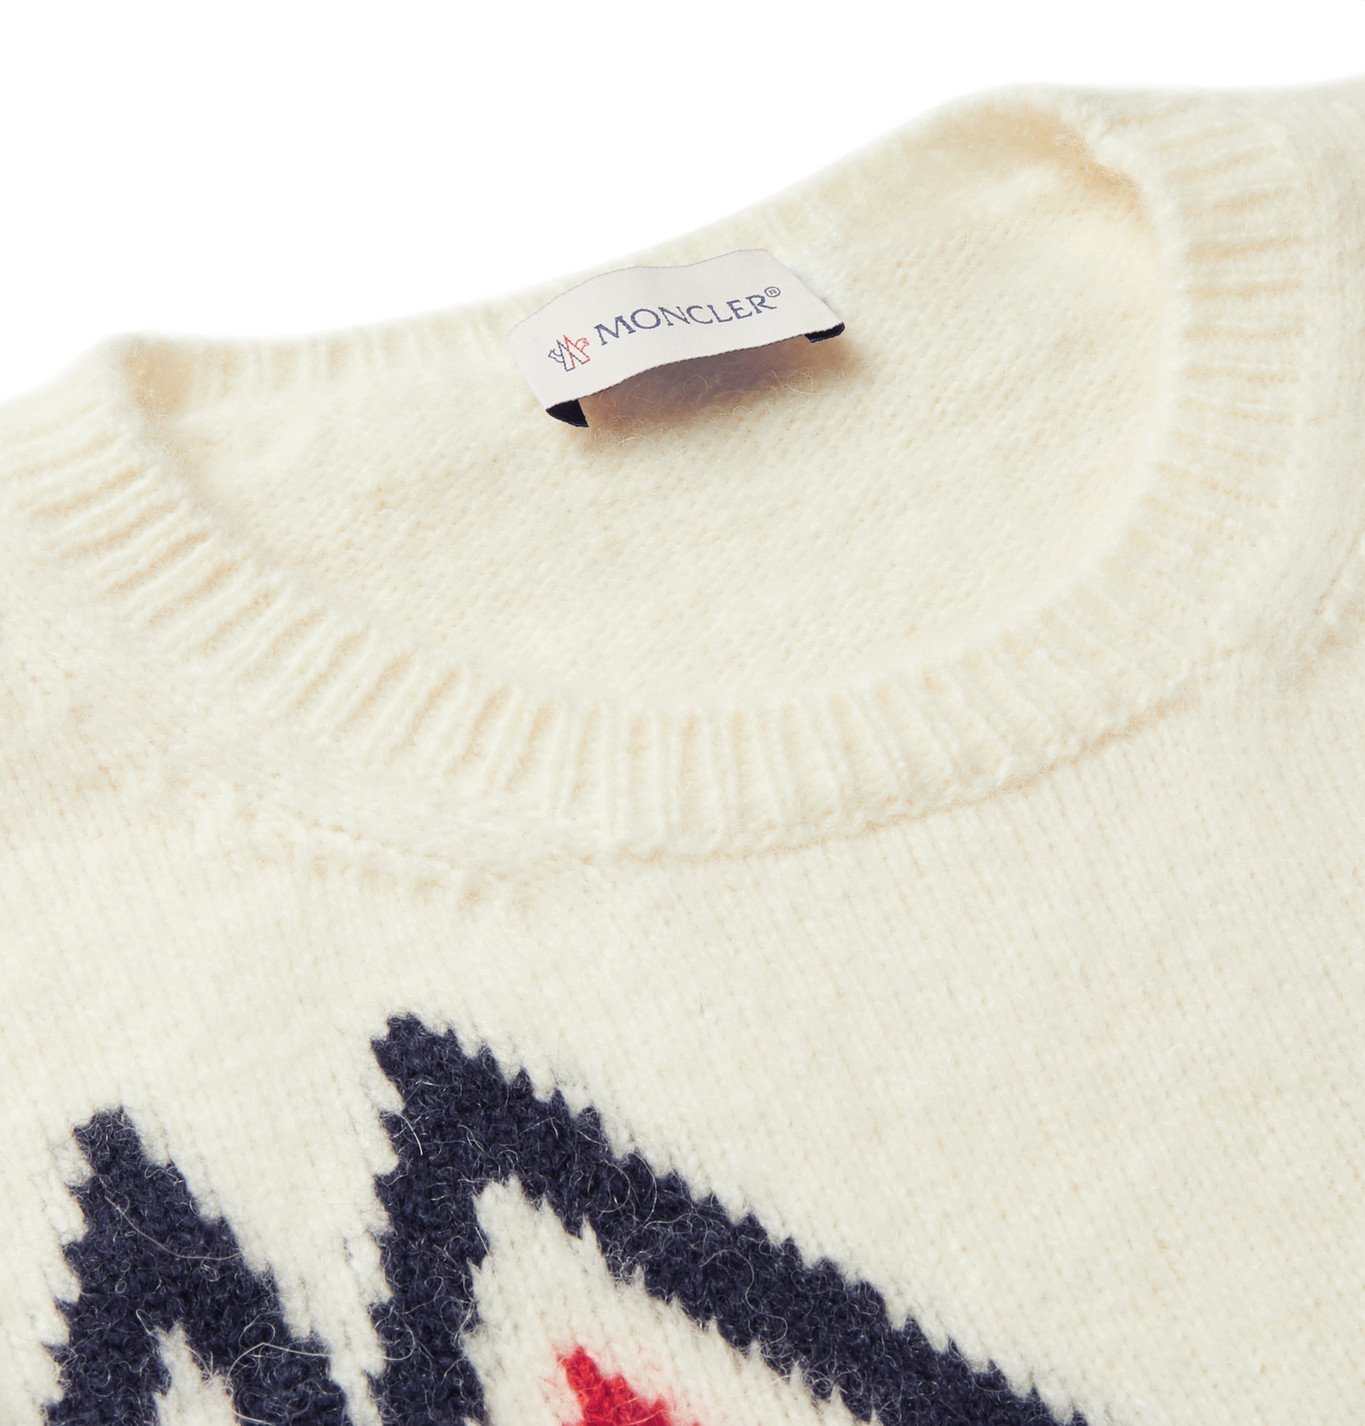 Moncler - Slim-Fit Intarsia-Knit Sweater - Neutrals Moncler